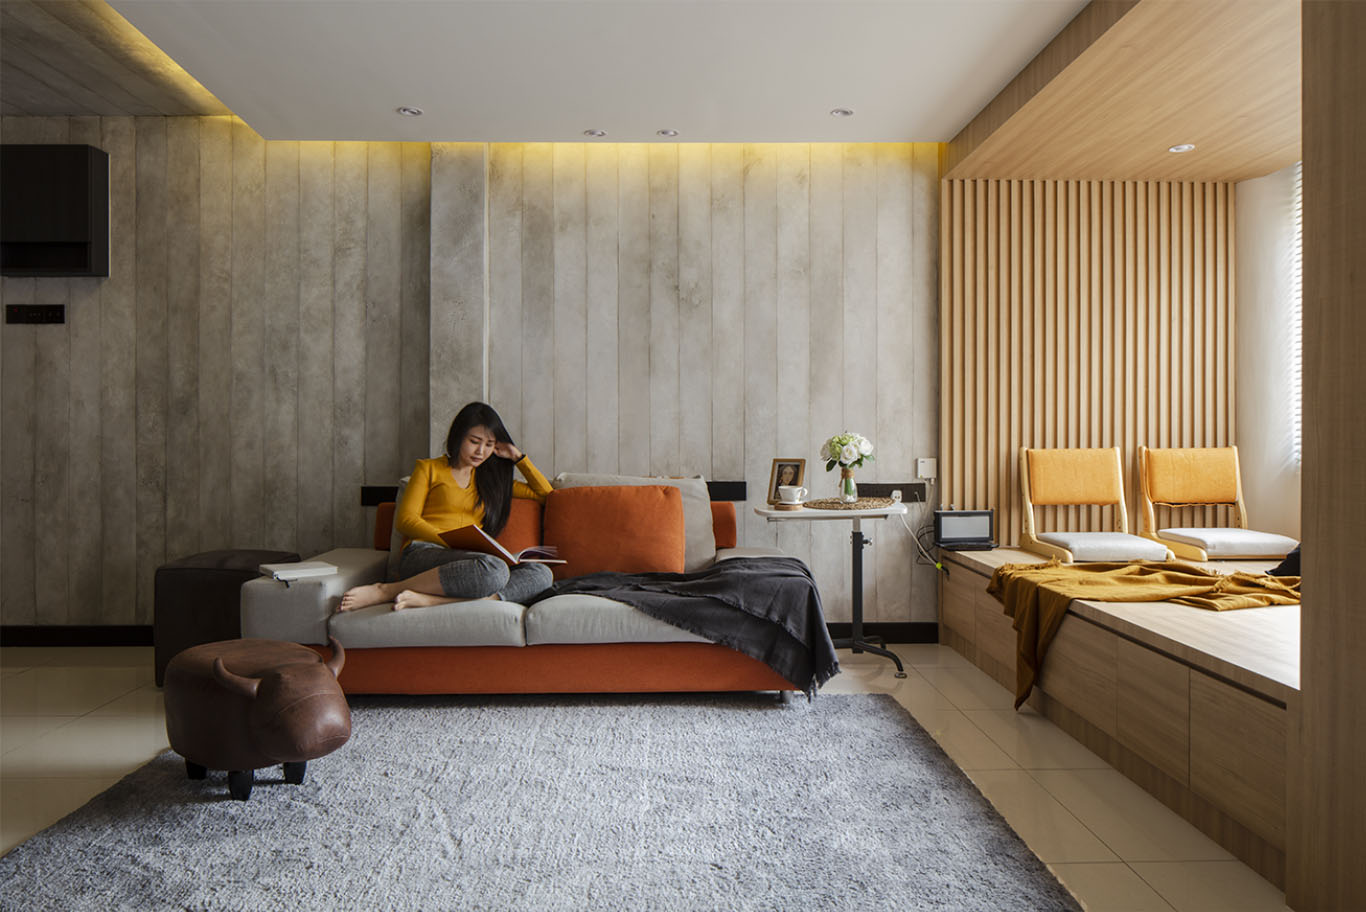 Modern japandi interior design with rustic wall panels, hidden gold ceiling light, wooden window seat with a Zaisu, Japanese chair with a back and no legs